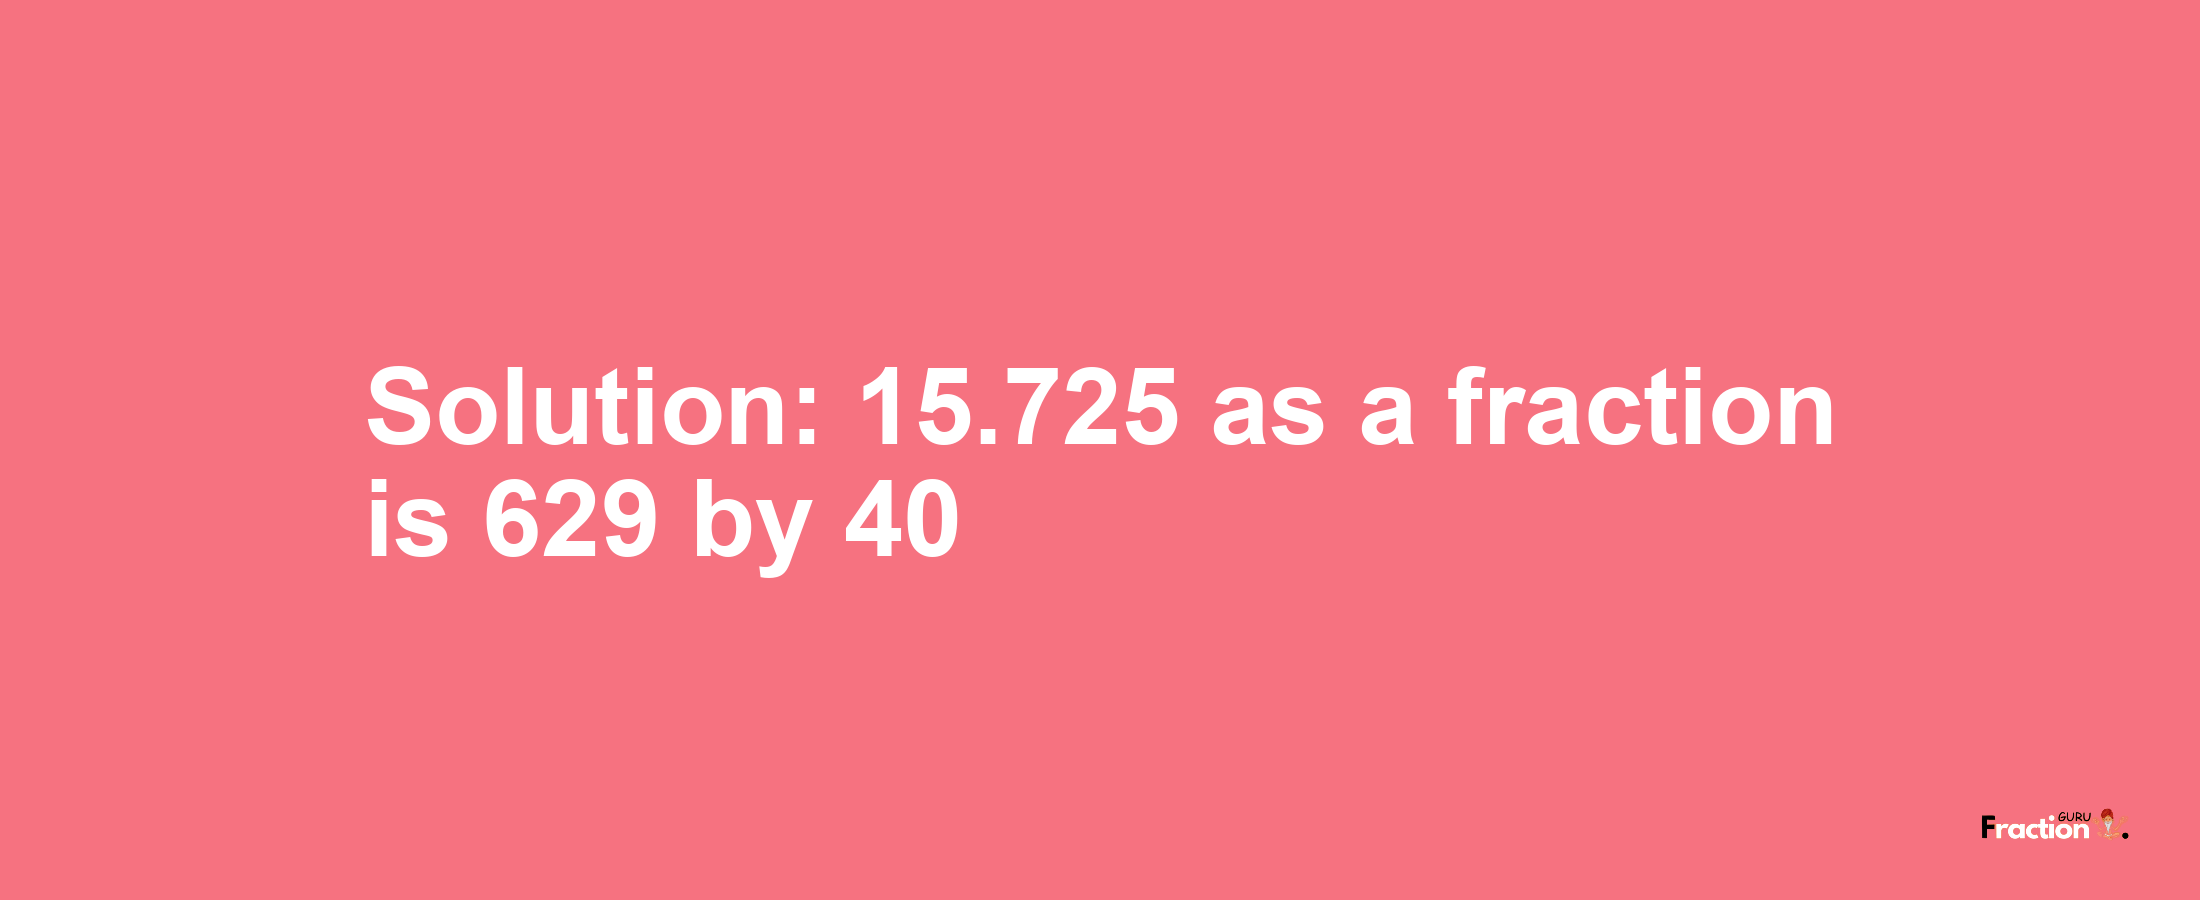 Solution:15.725 as a fraction is 629/40